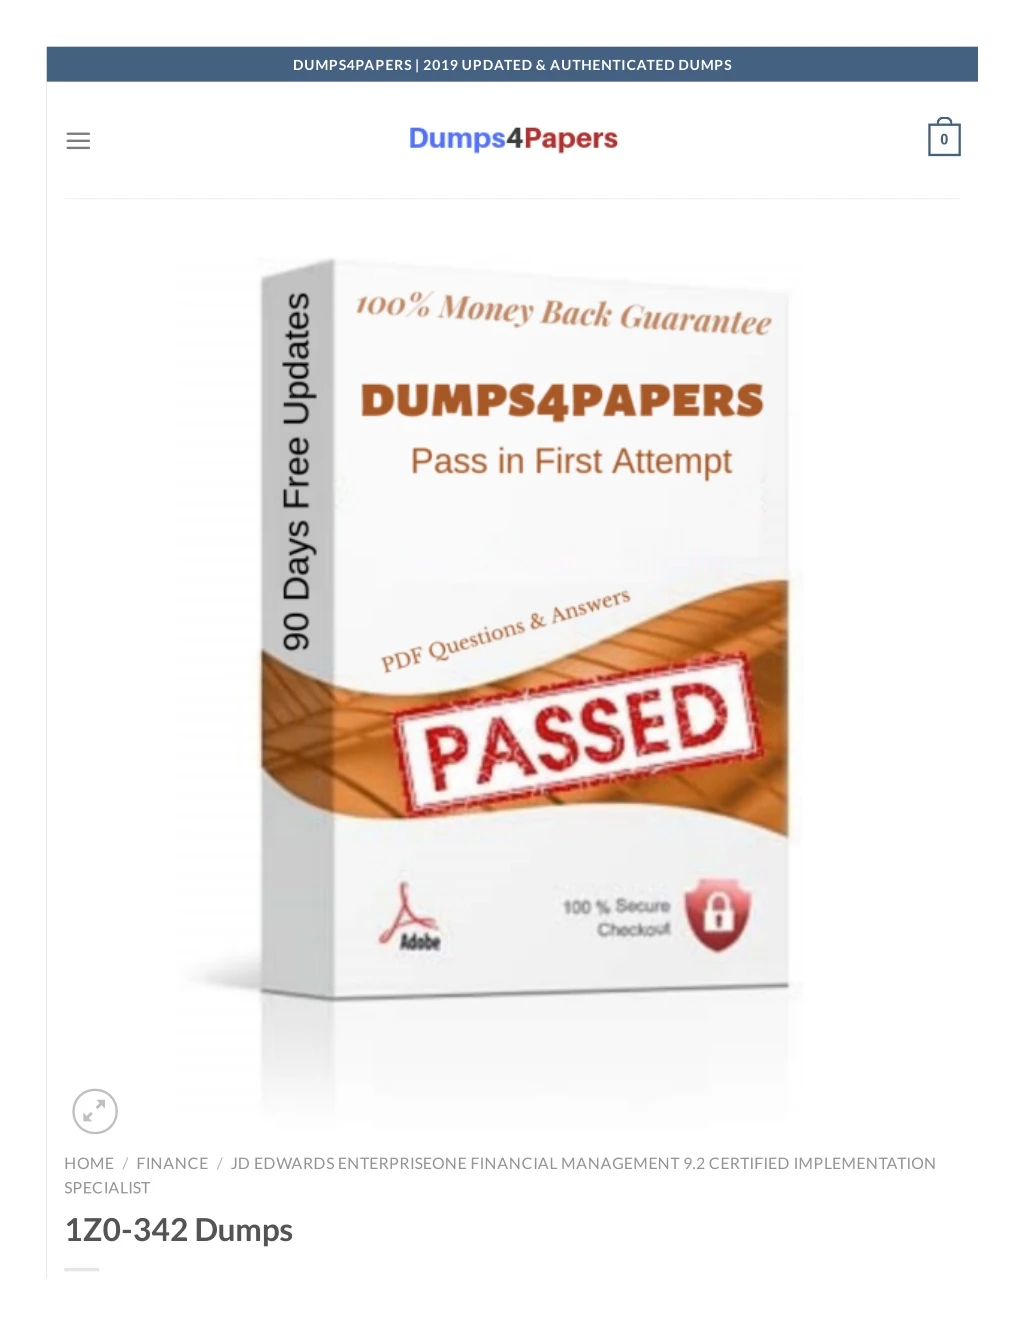 dumps4papers 2019 updated authenticated dumps